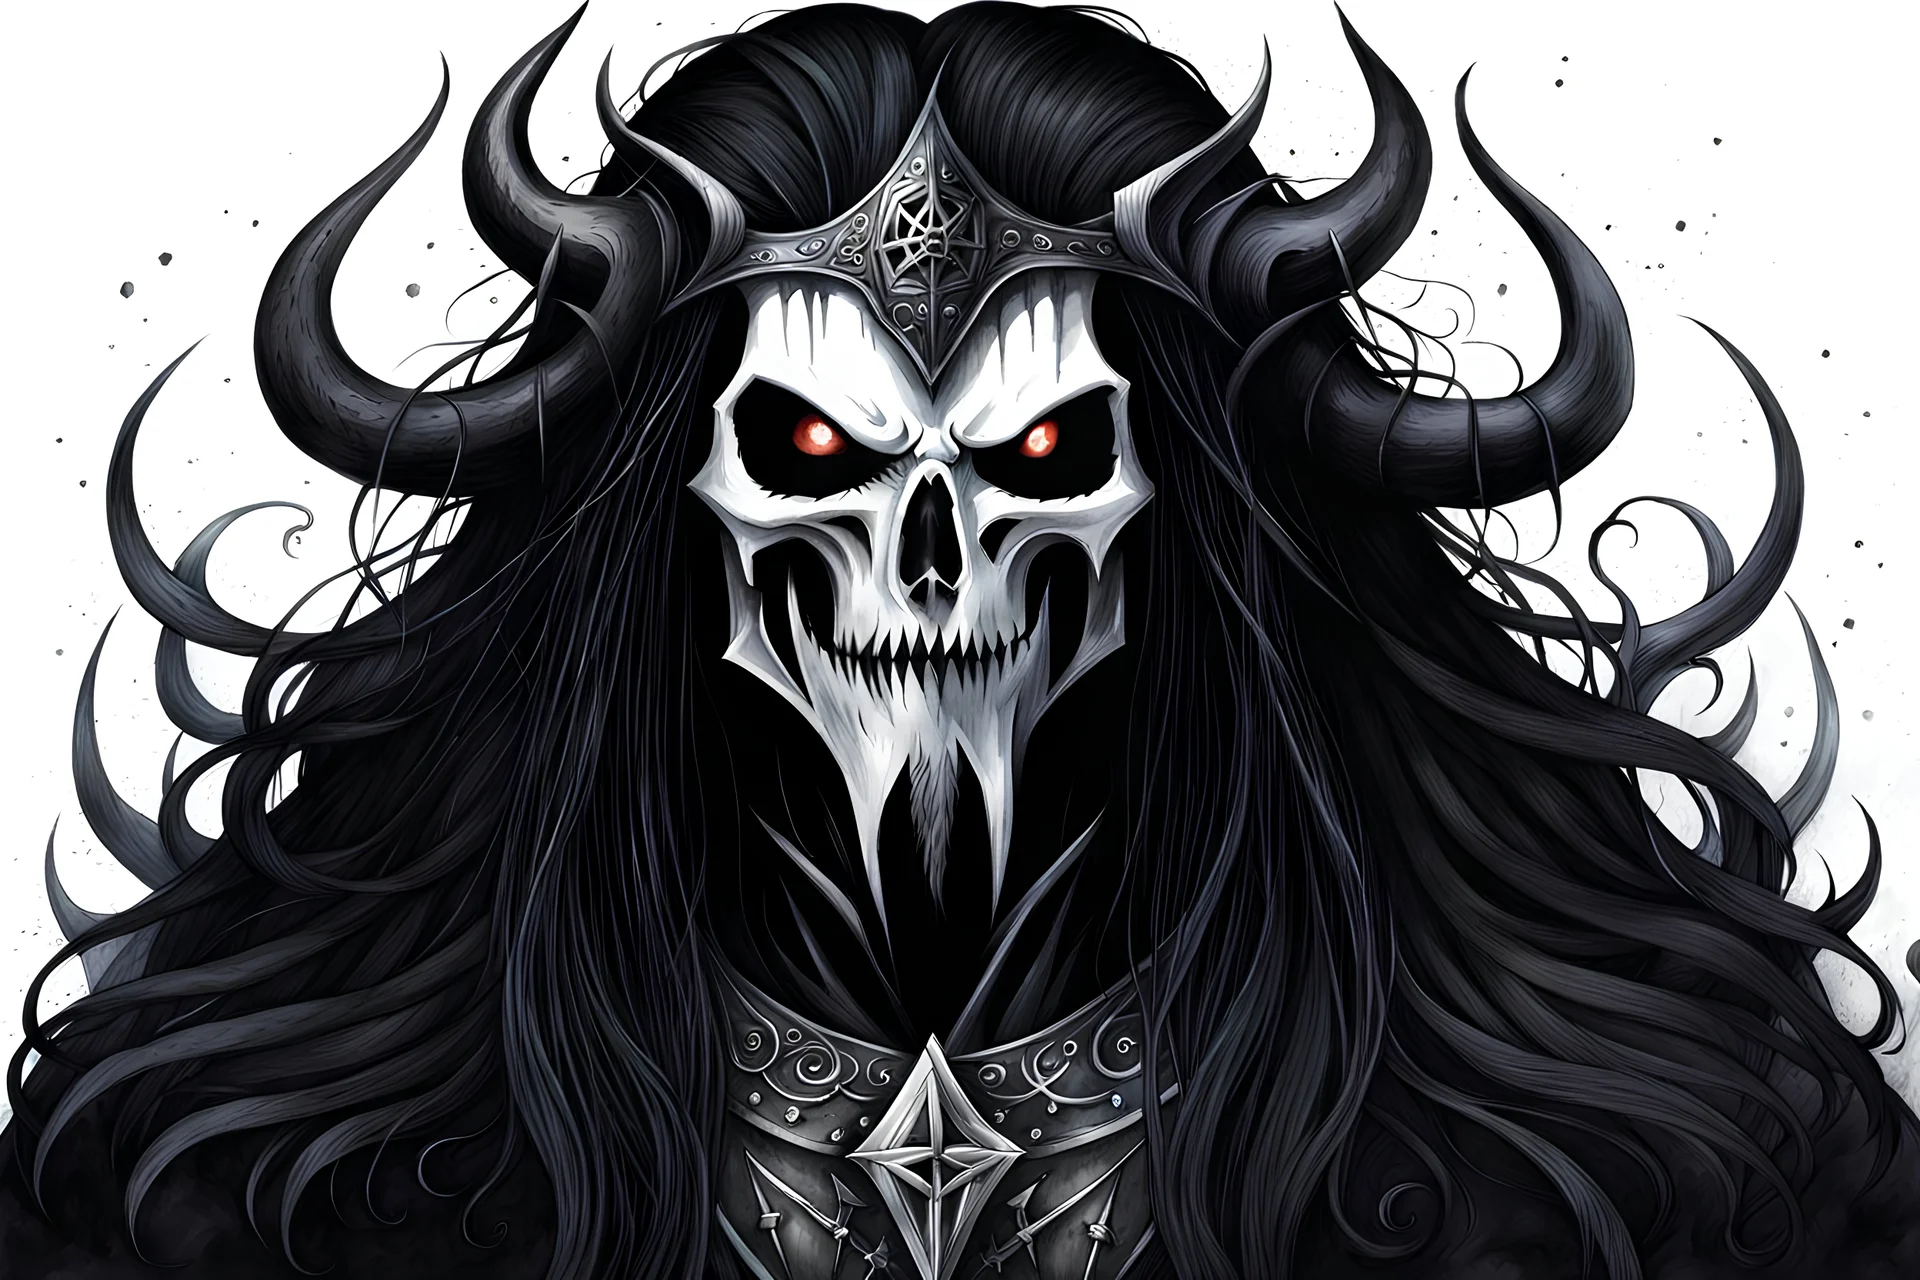 So Abyss: Unveiling the Top 50 Black Metal Albums Ever characters in an artful cartoon, in a watercolor and pencil style drawing,dark full of life image with a real metal style feel to it, add a full band in the image with power and energy to it